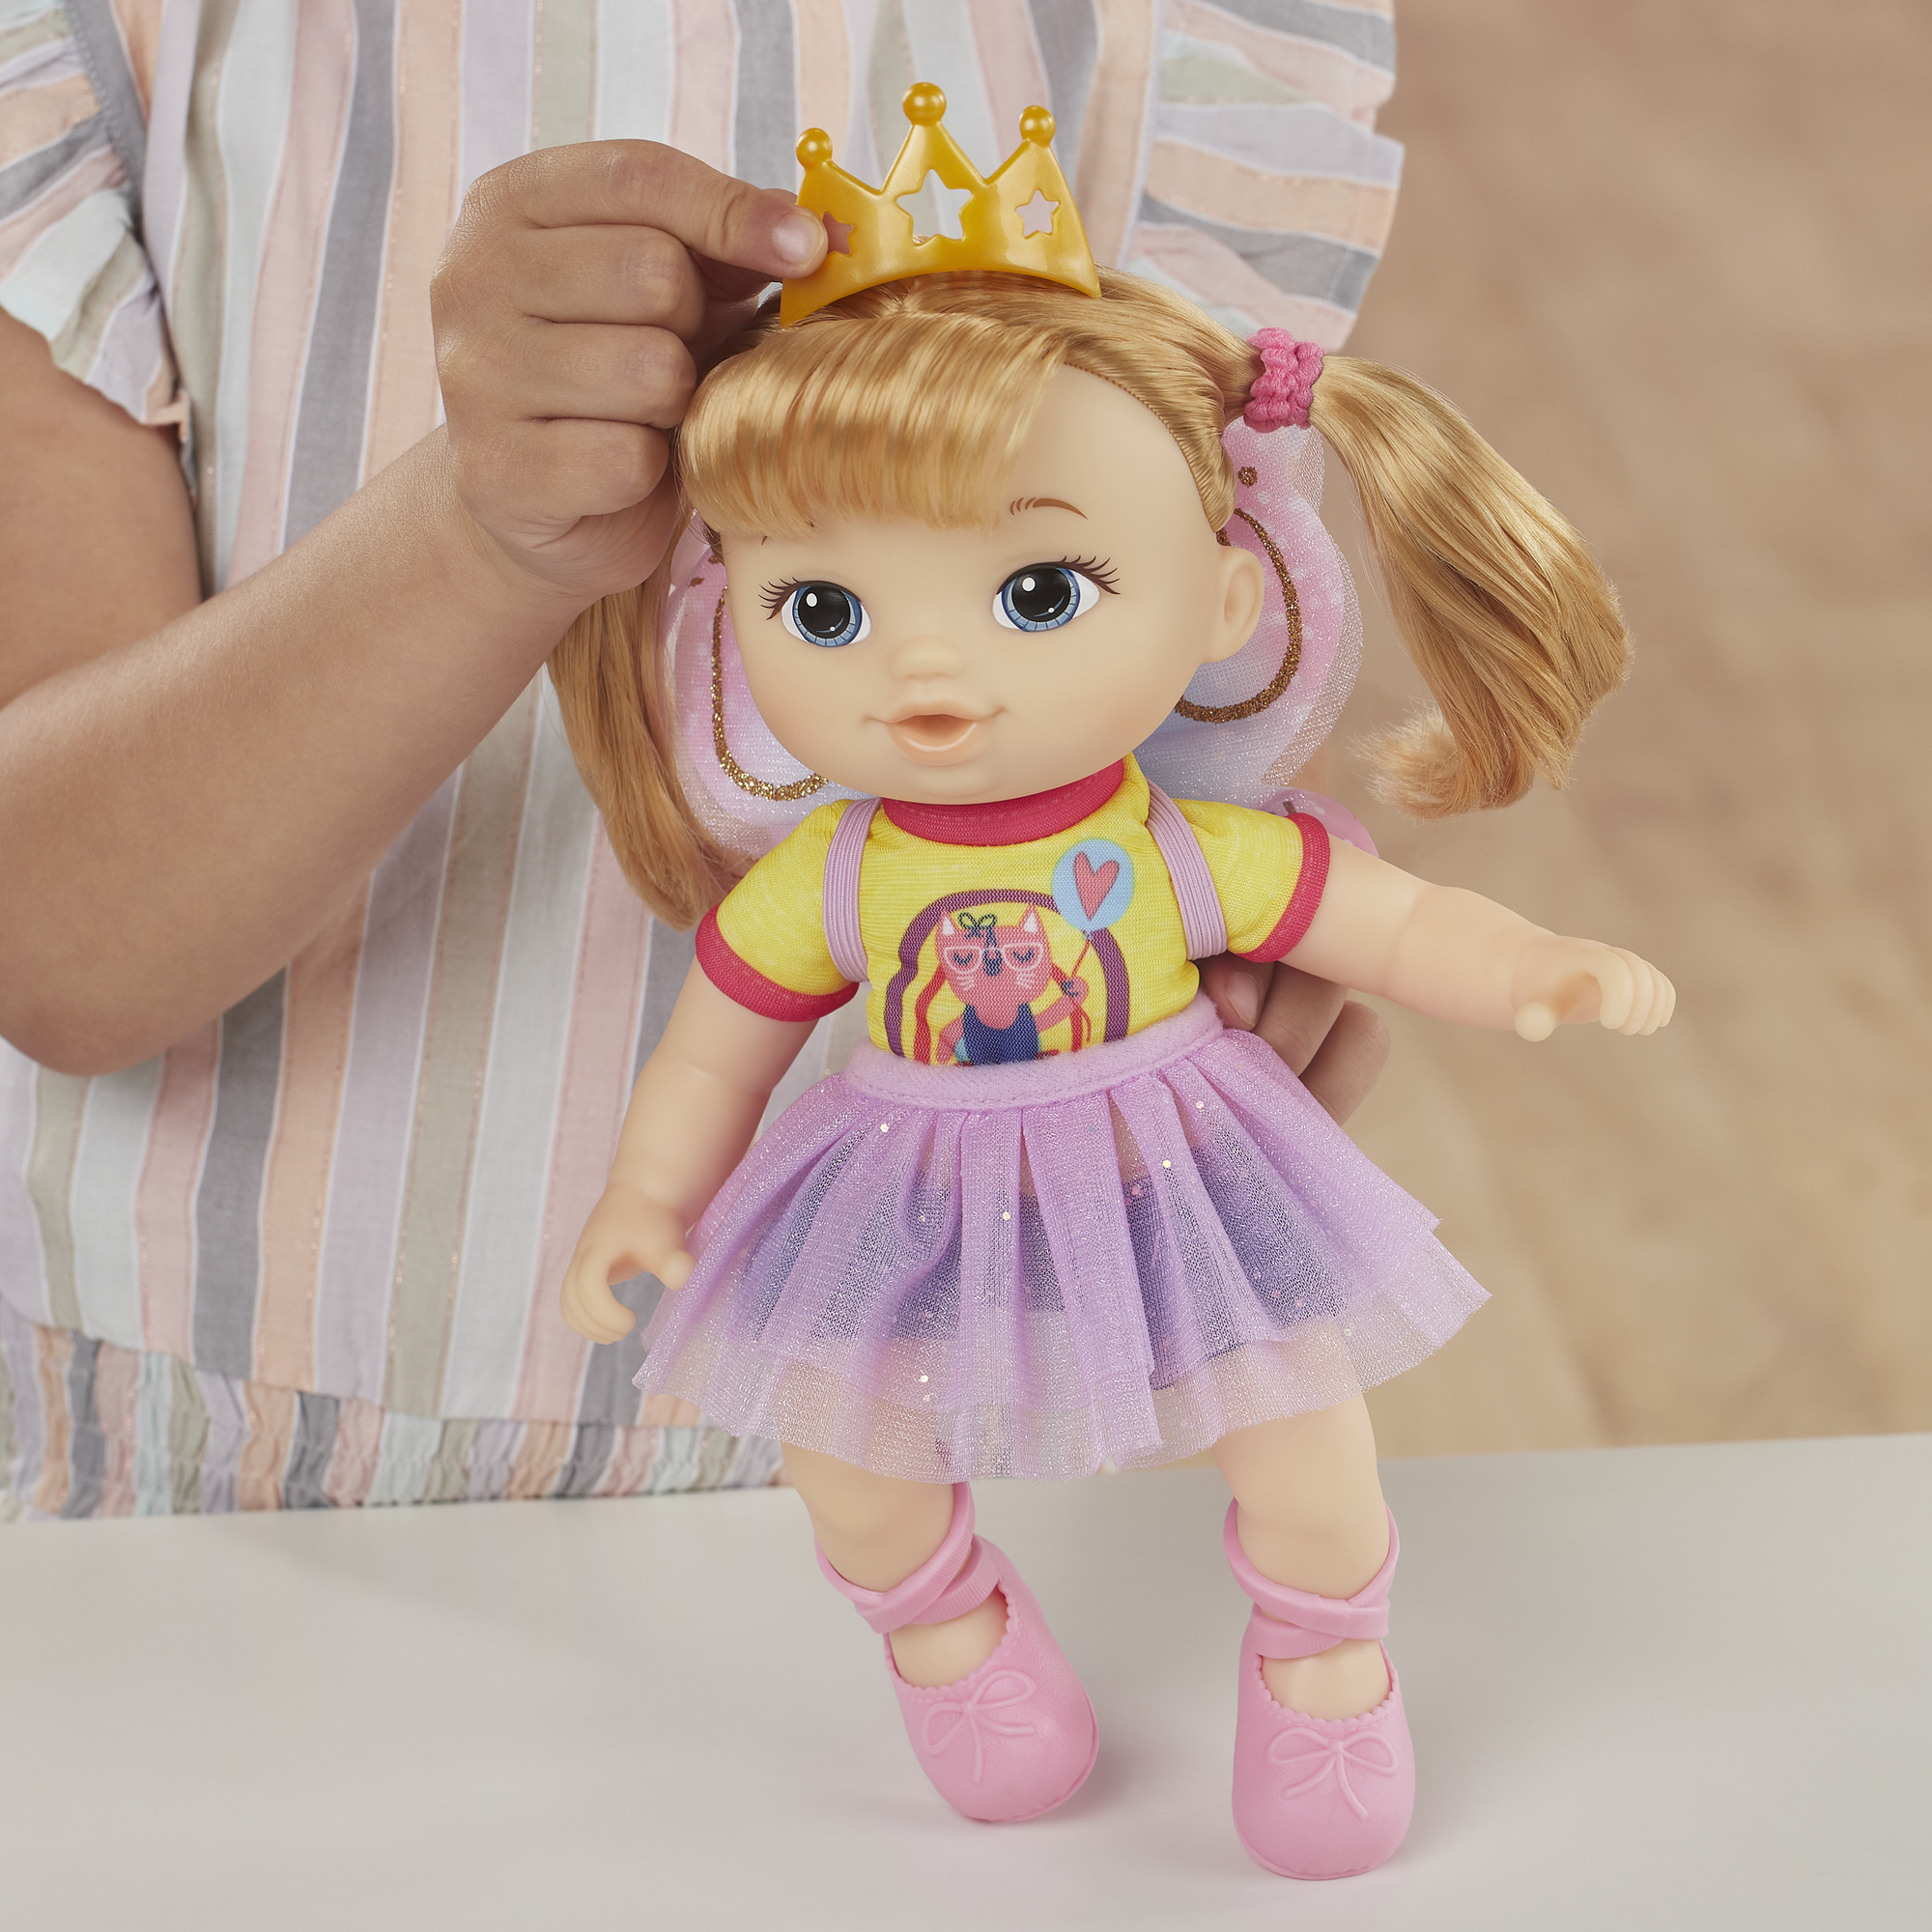 Baby Alive Little Styles, Ballet Outfit for Littles Toddler Dolls - image 3 of 7